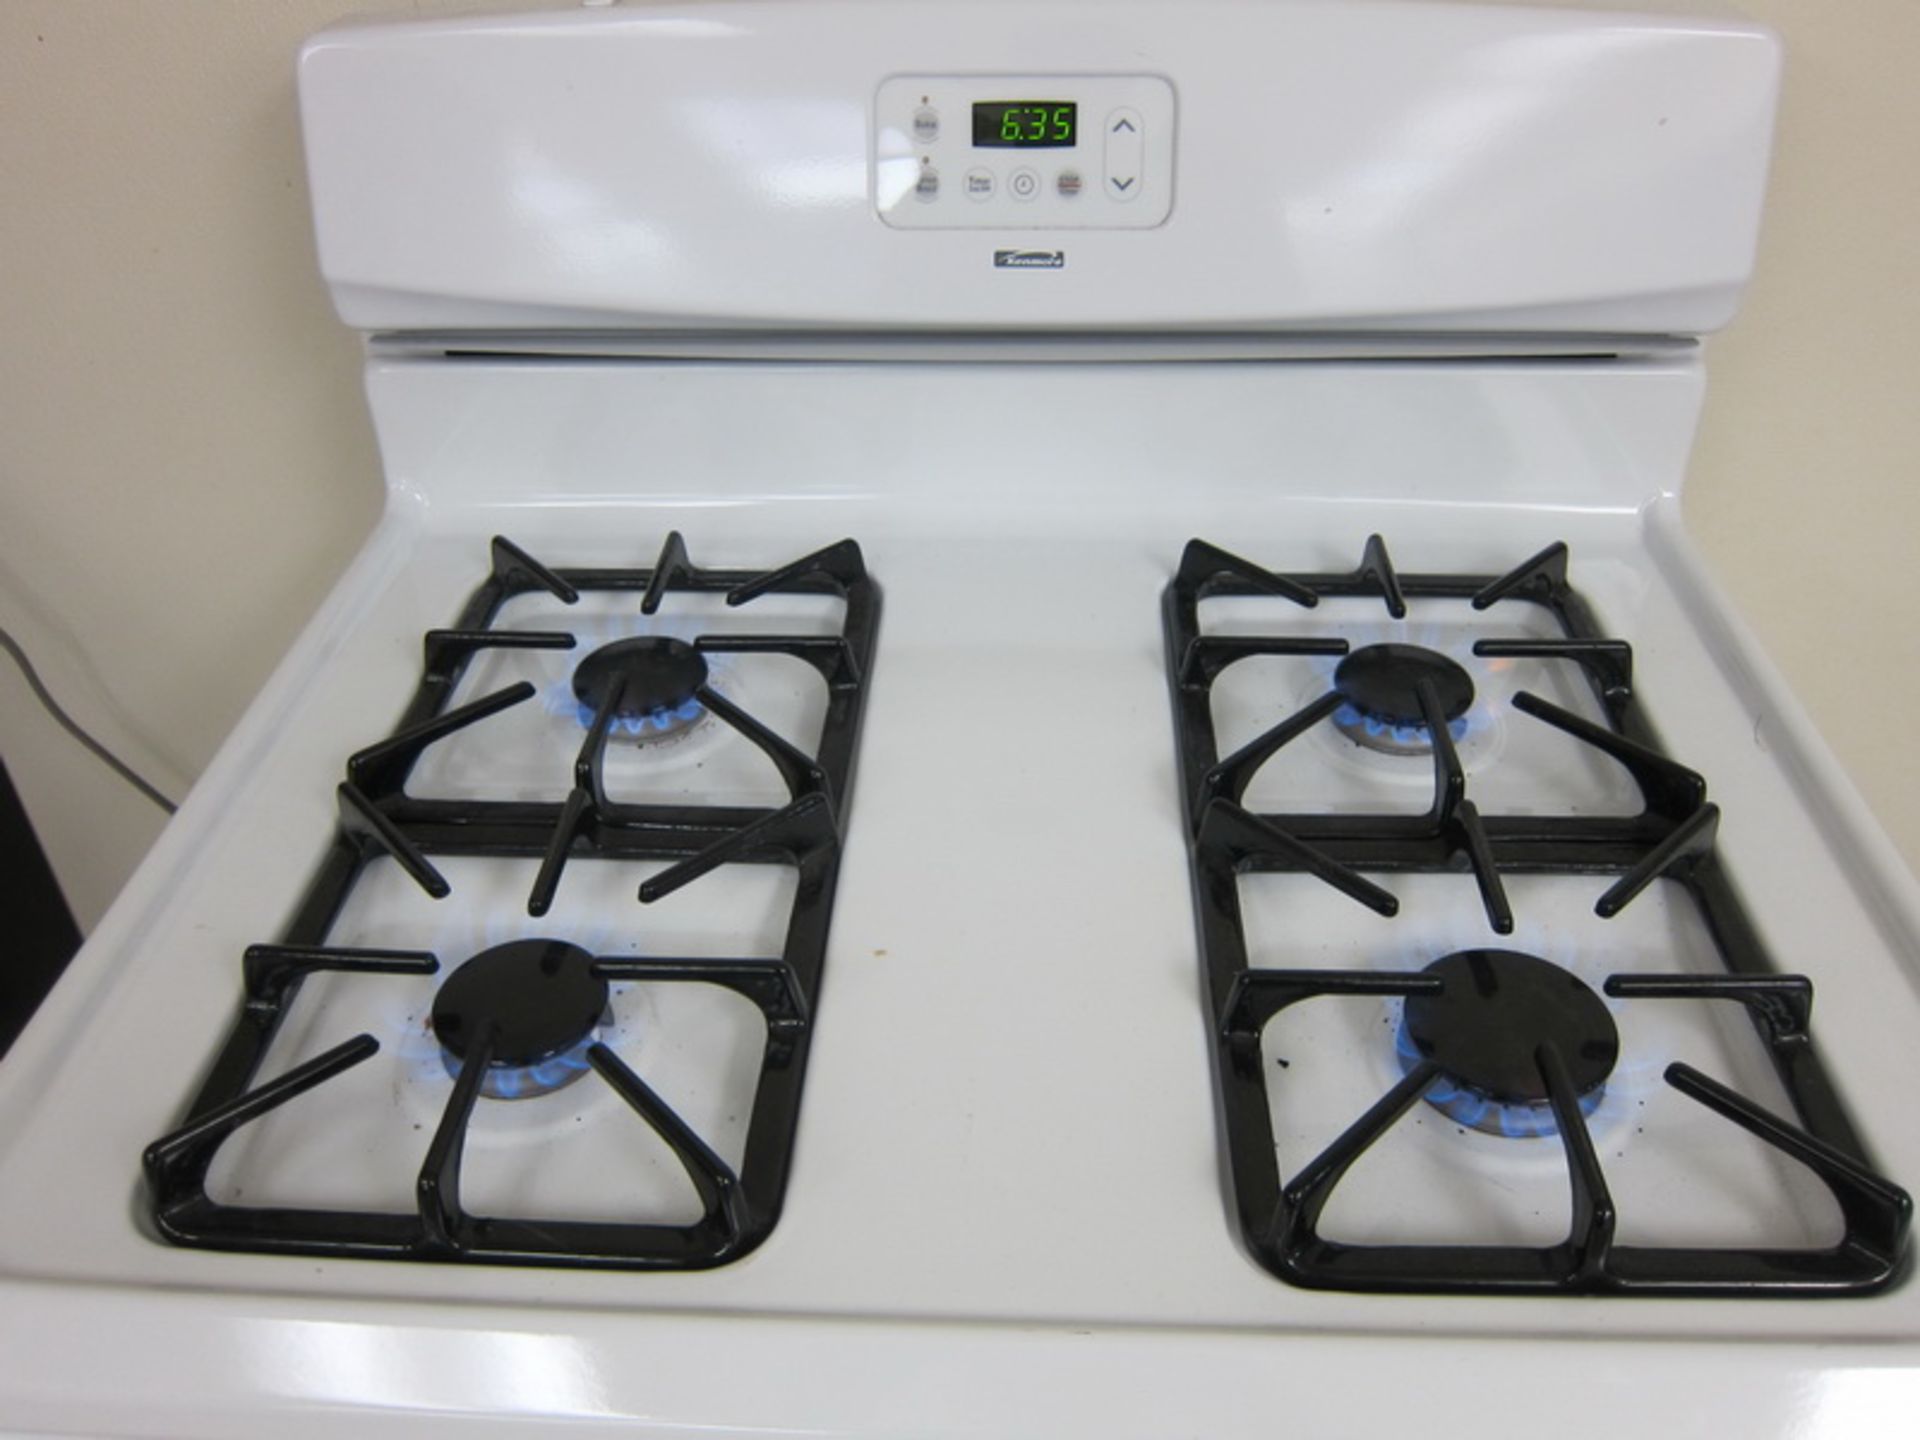 [Lot] Kenmore stove, model 790.714526, s/n VF70316988, Four burner gas stove, with bottom broiler, - Image 5 of 8